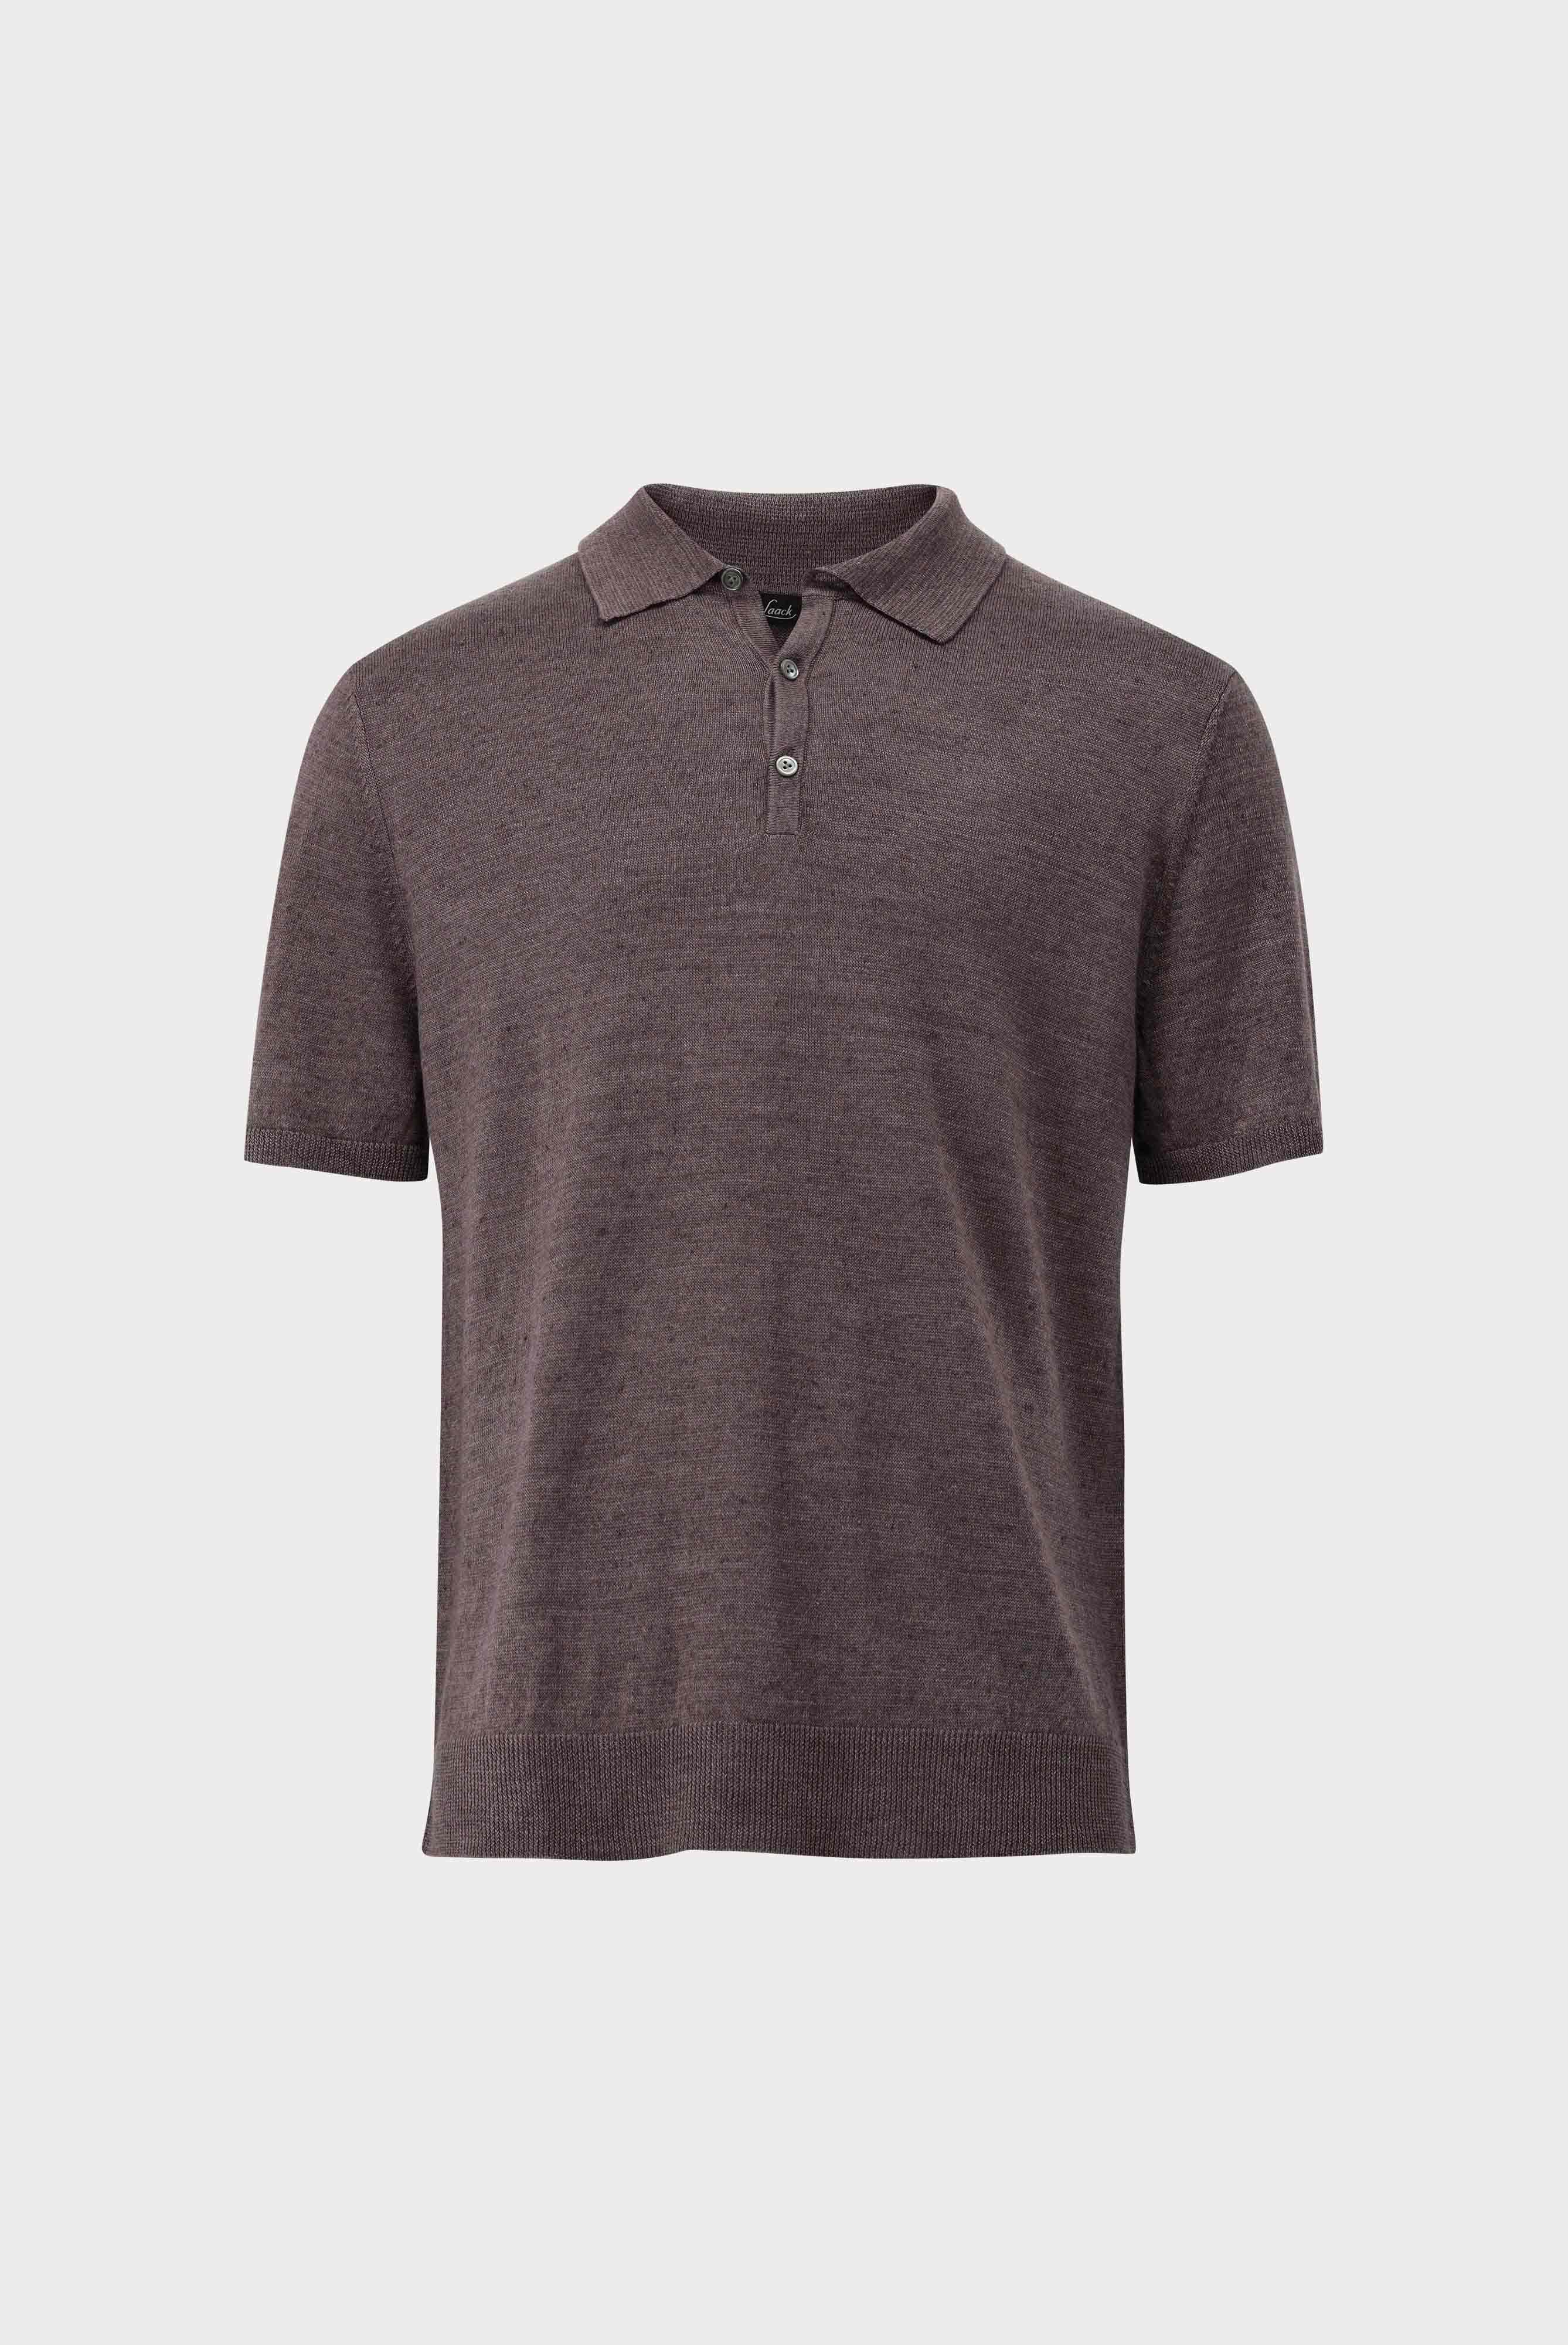 Poloshirts+Knit Polo in Linen+82.8603..S00169.680.L